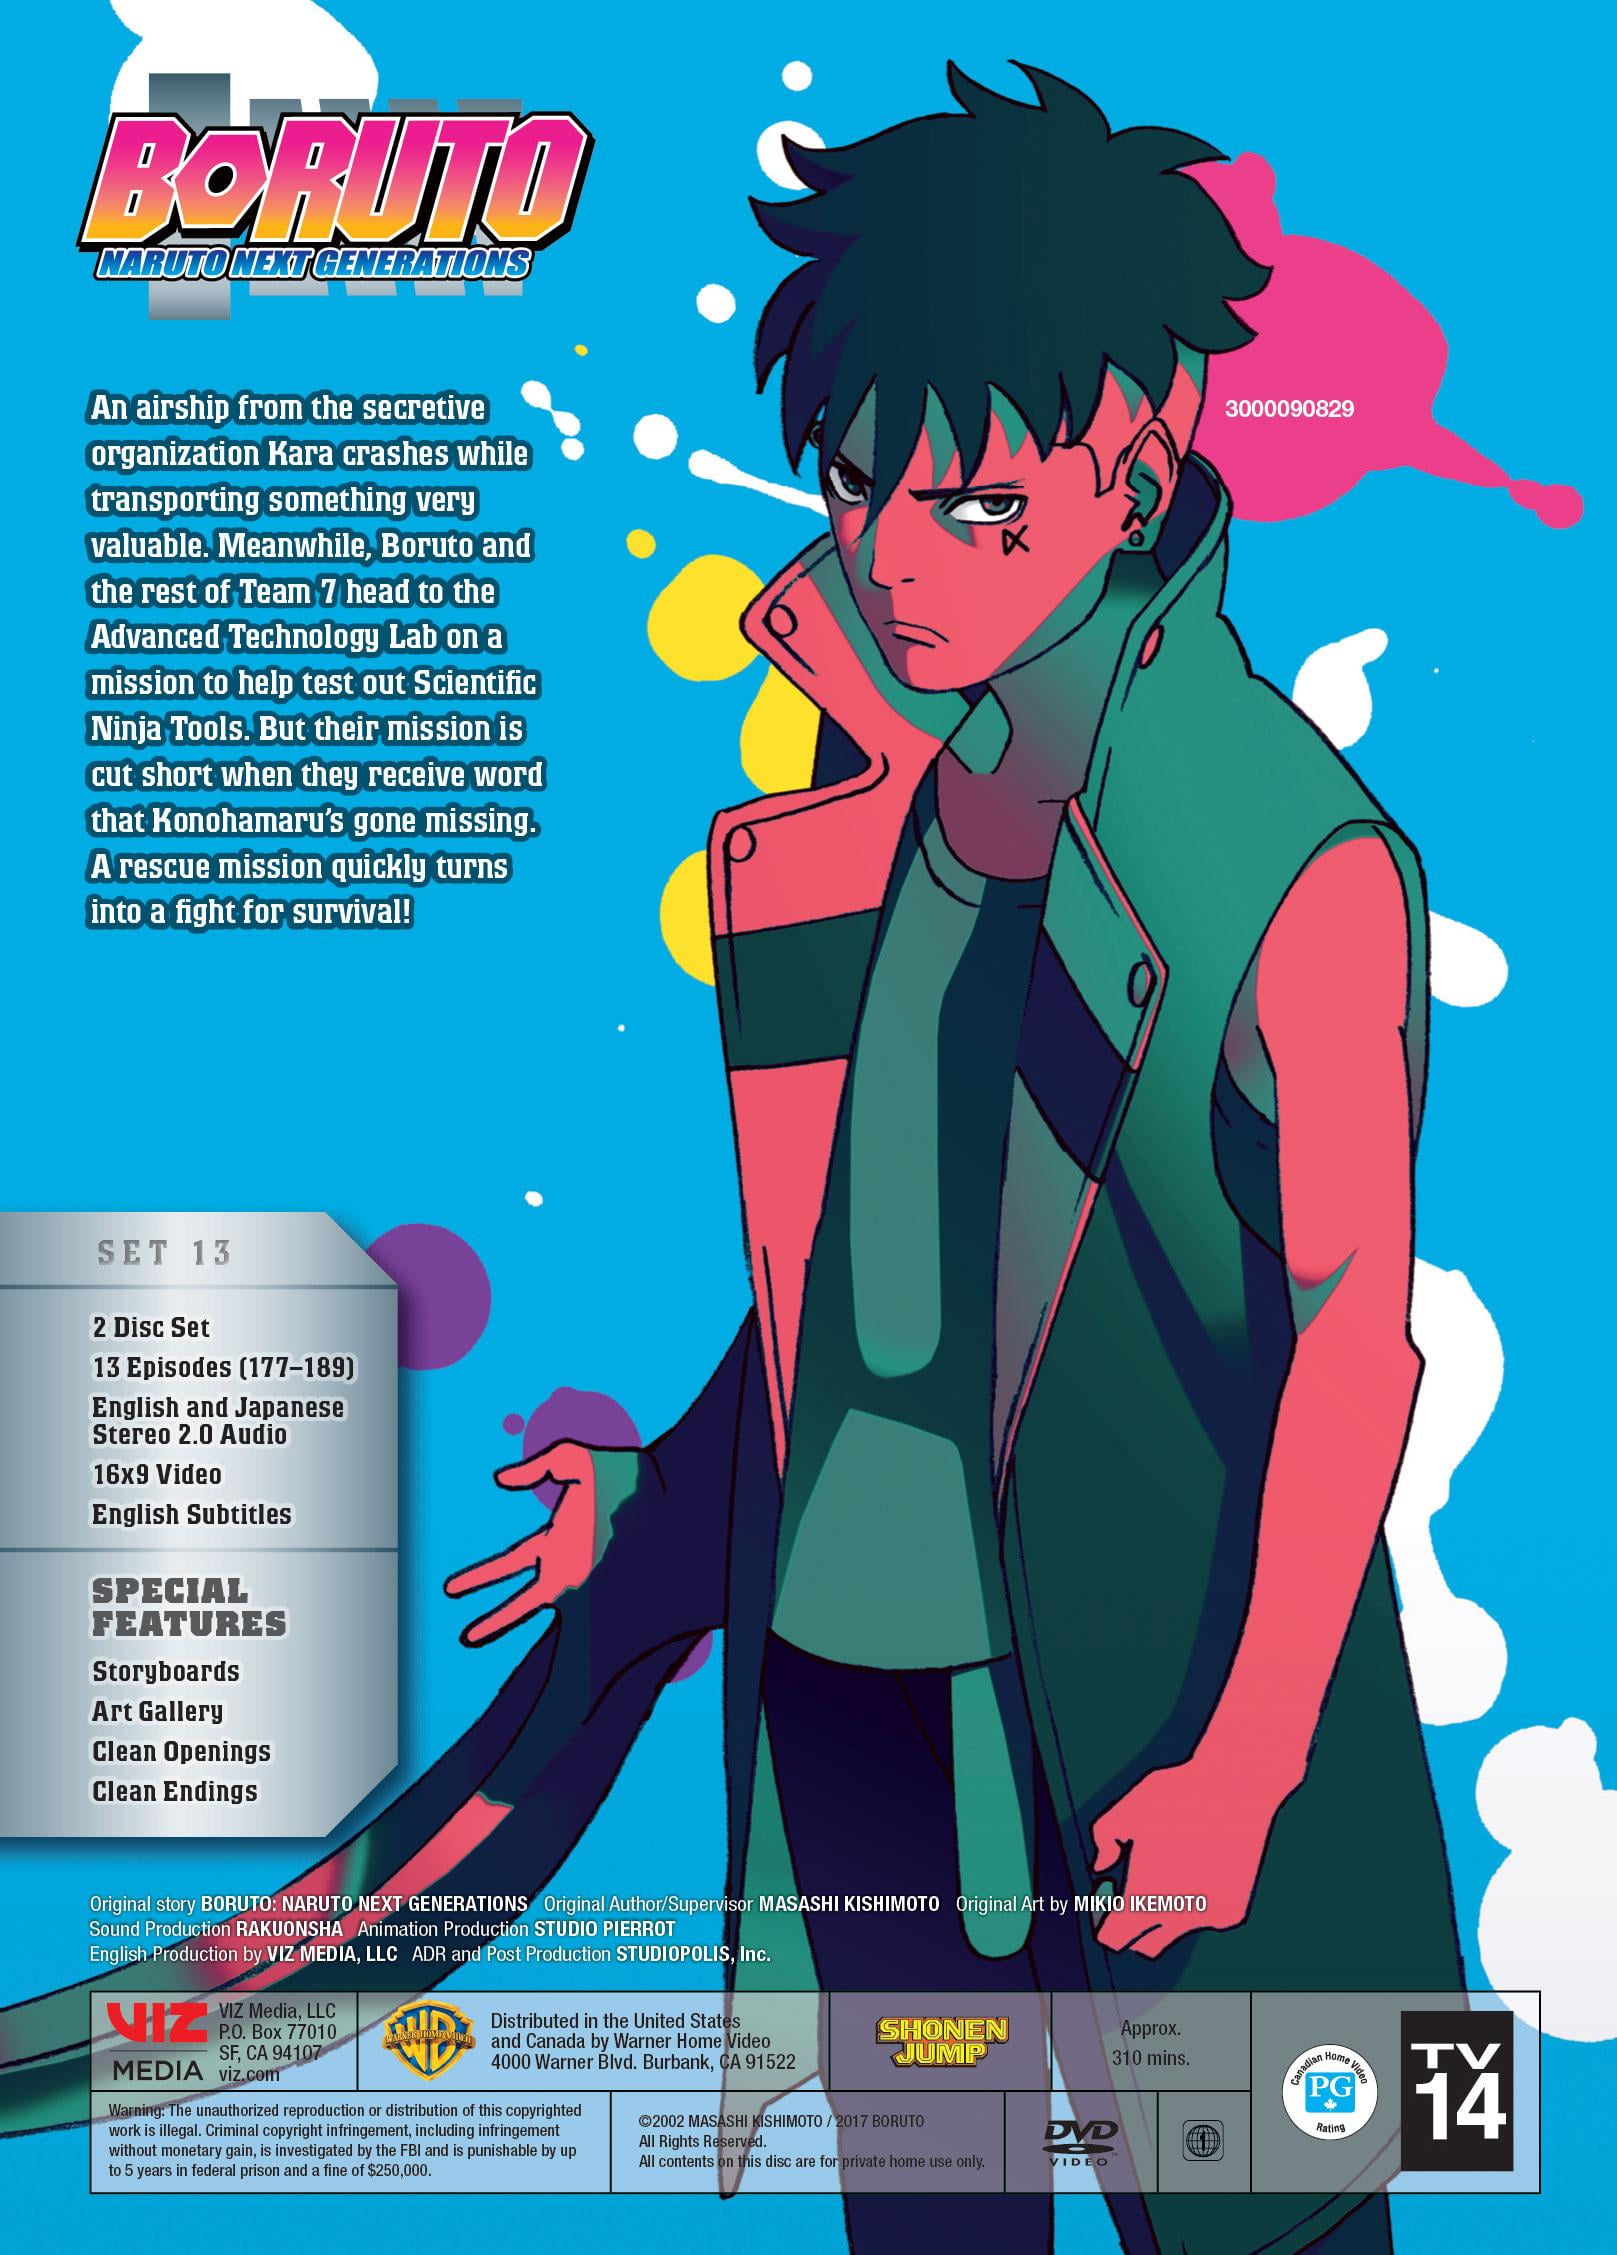 ANIME Media - Boruto: Naruto the Movie Villains Previewed Next Monday's  issue 33 of Shonen Jump is set to offer a look at the antagonists of Boruto:  Naruto the Movie . These